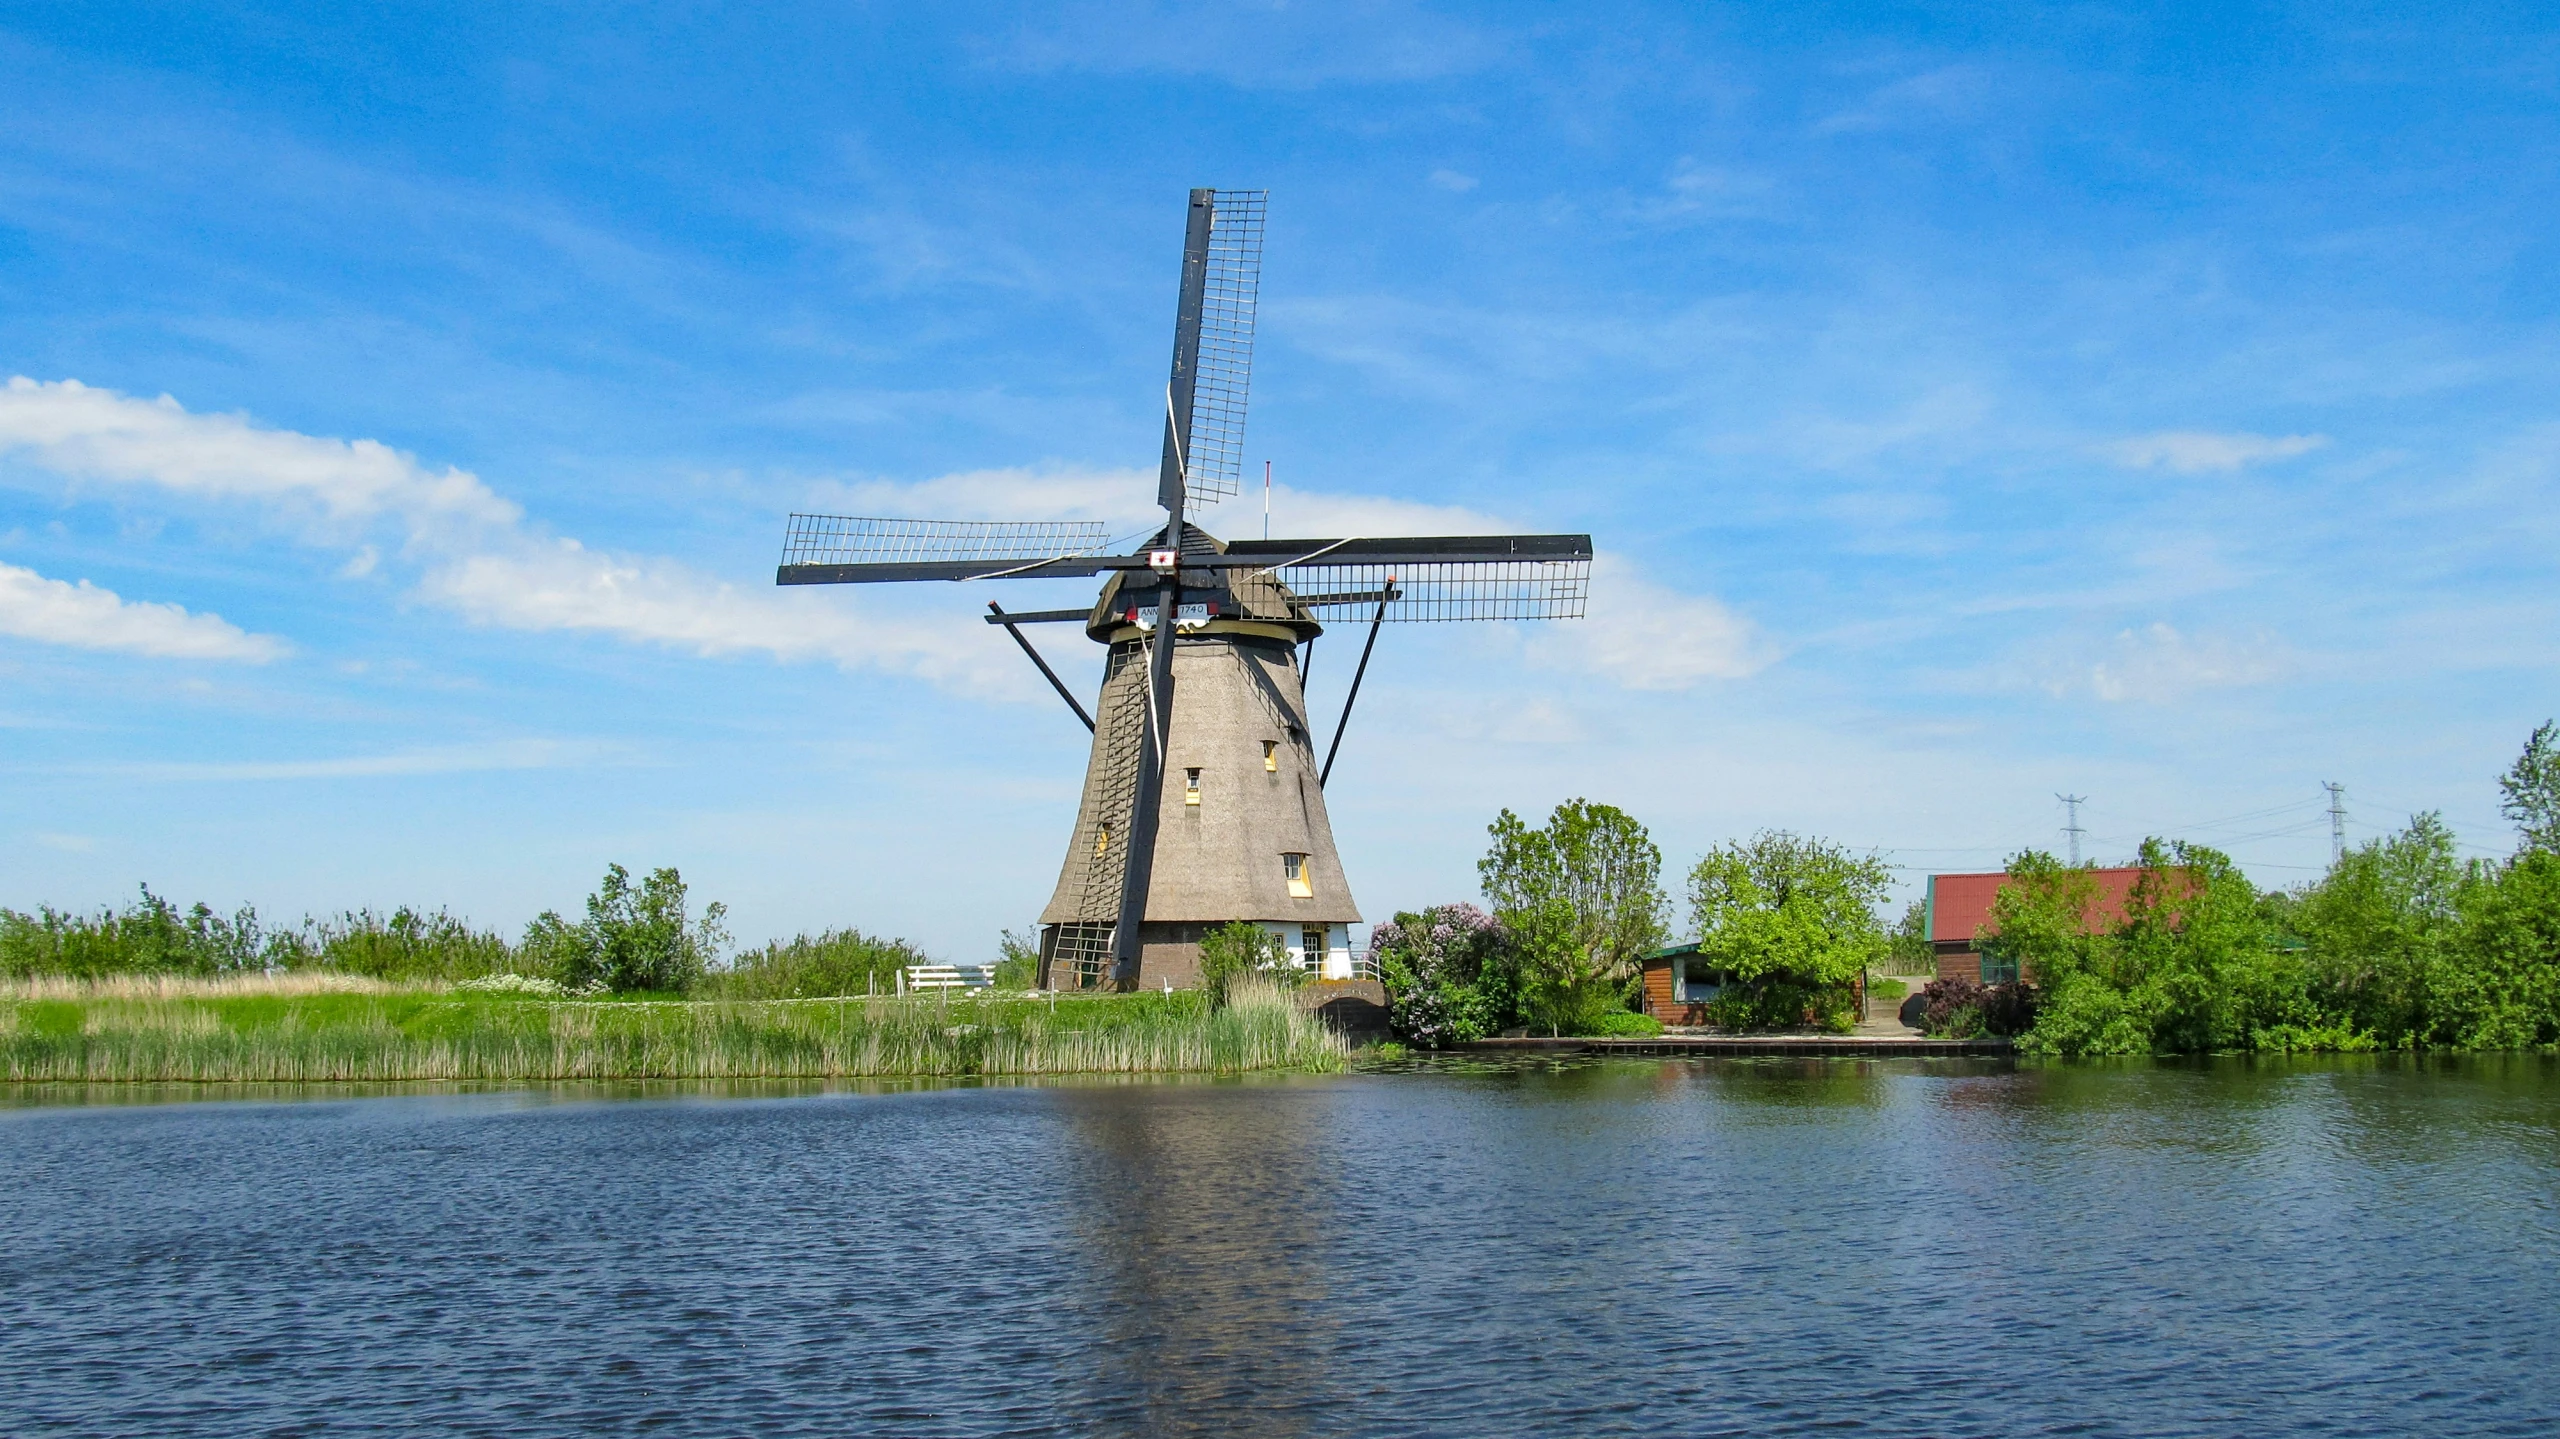 a windmill is seen on the bank of a river